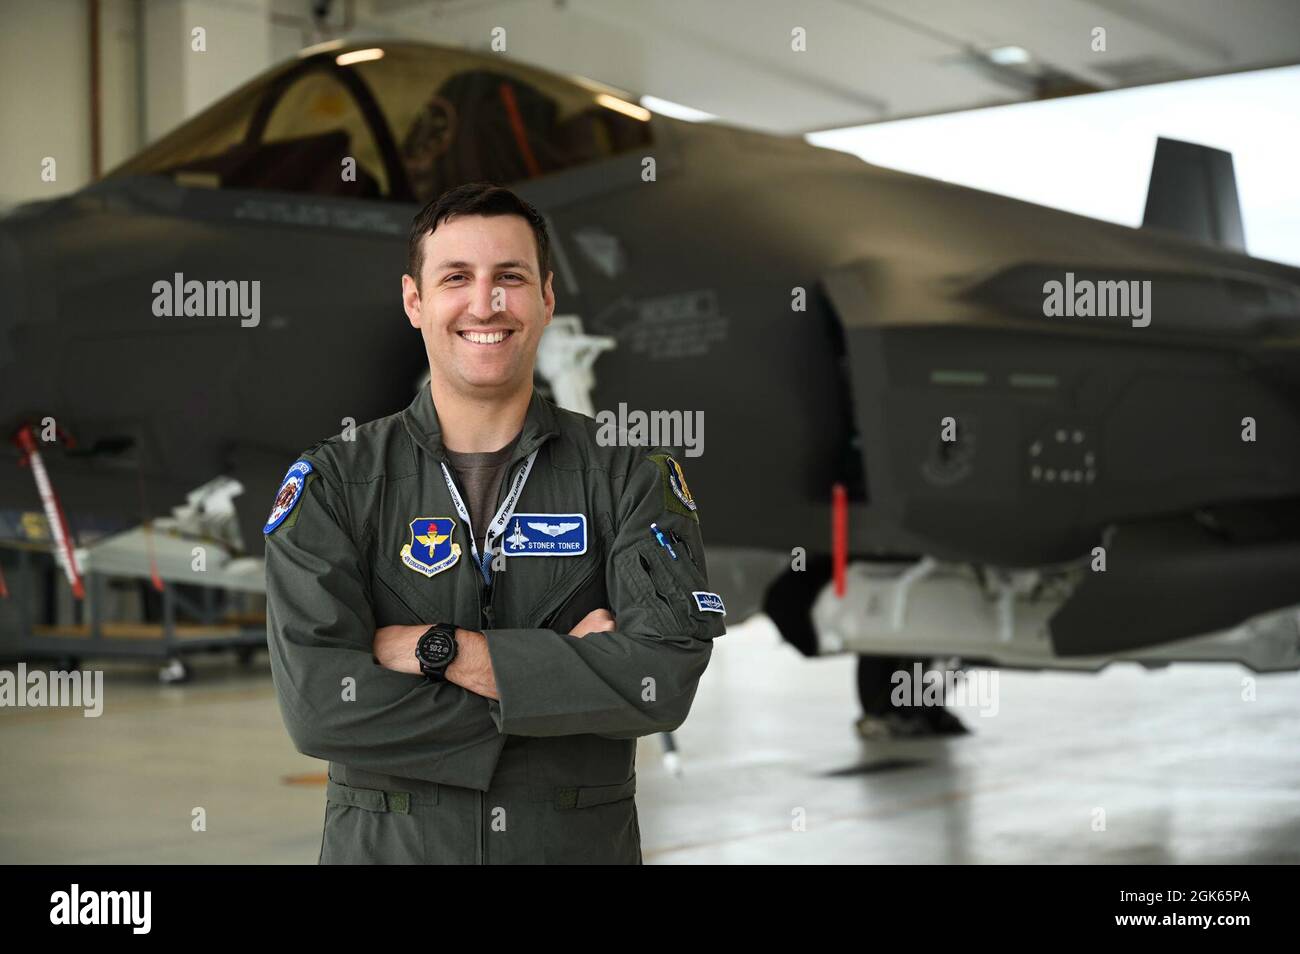 U.S. Air Force Capt. John Toner, 58th Fighter Squadron F-35A Lighting II  student pilot, poses for a portrait Aug. 12, 2021, at Eielson Air Force  Base, Alaska. Toner went to the University